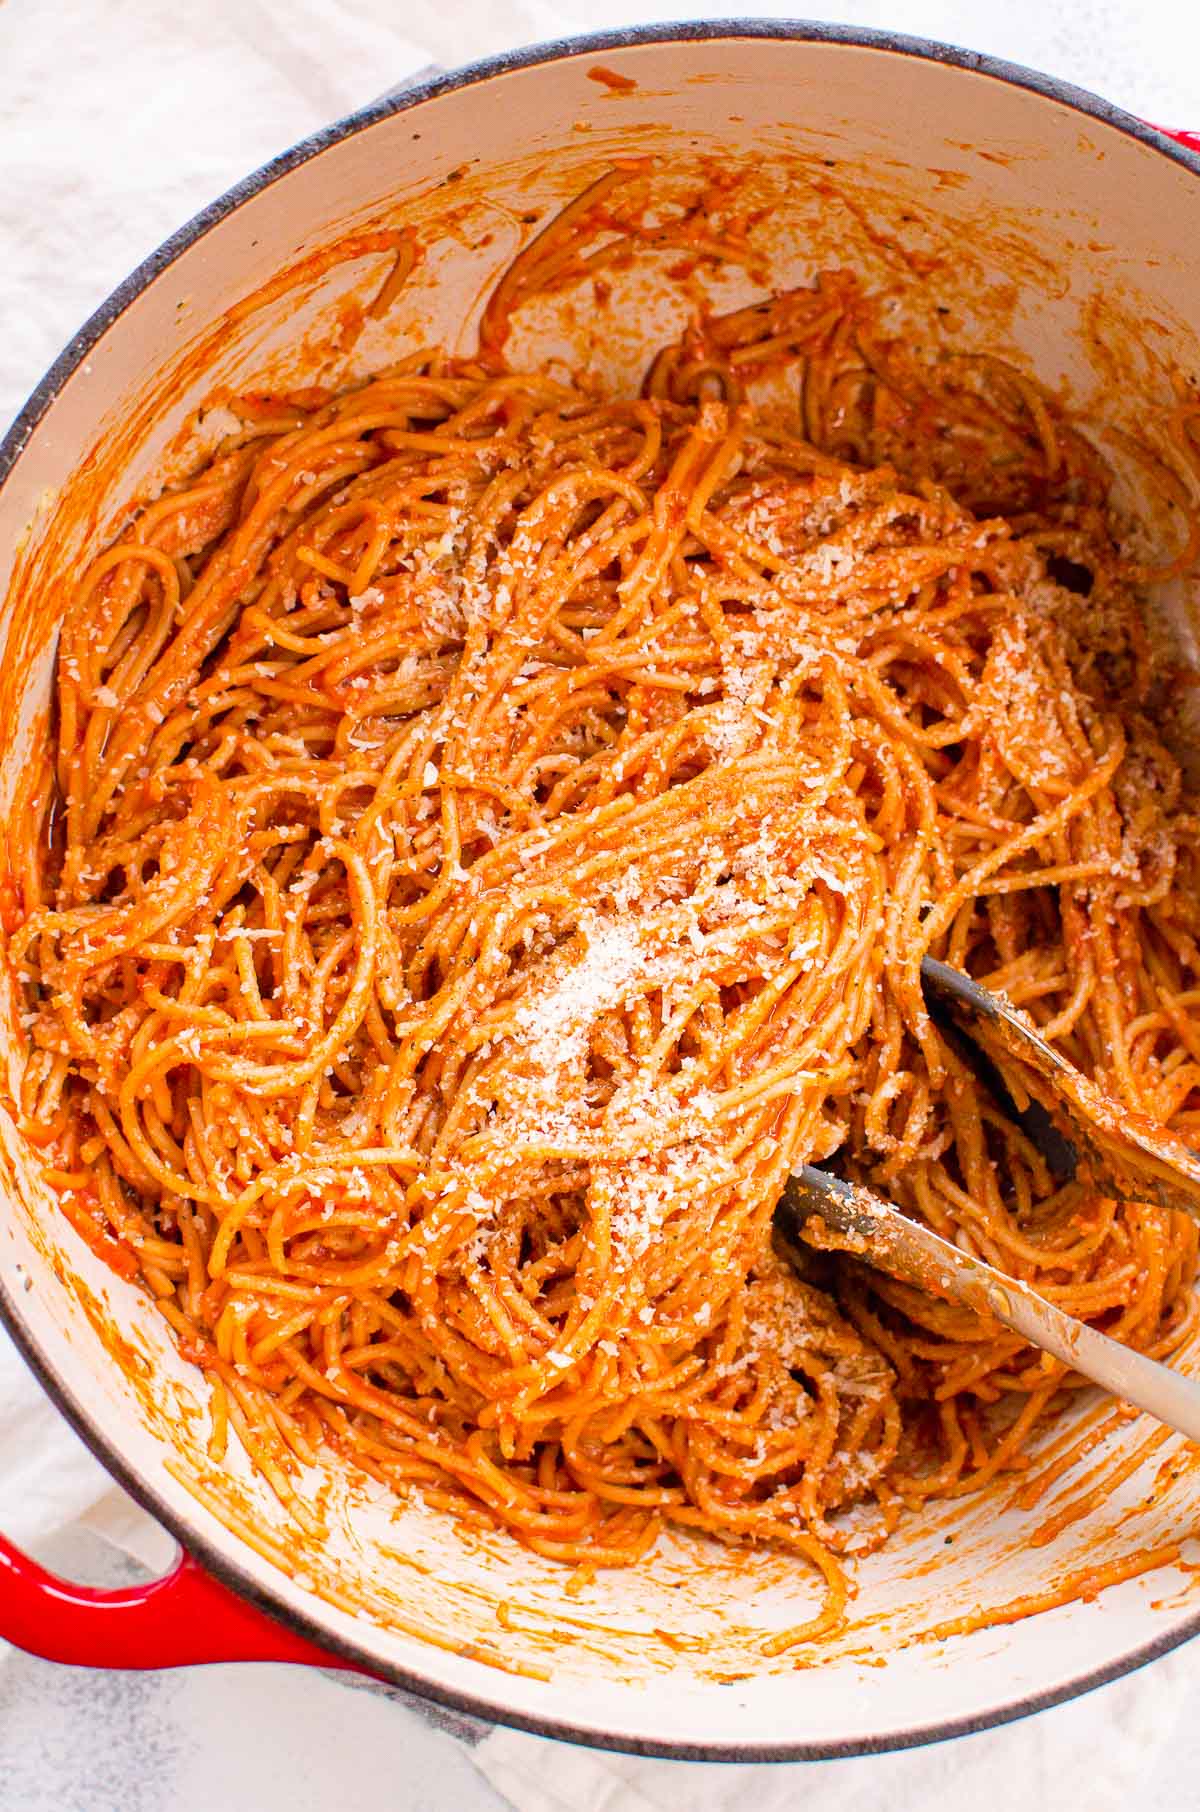 Easy spaghetti recipe in stove pot with parmesan cheese.